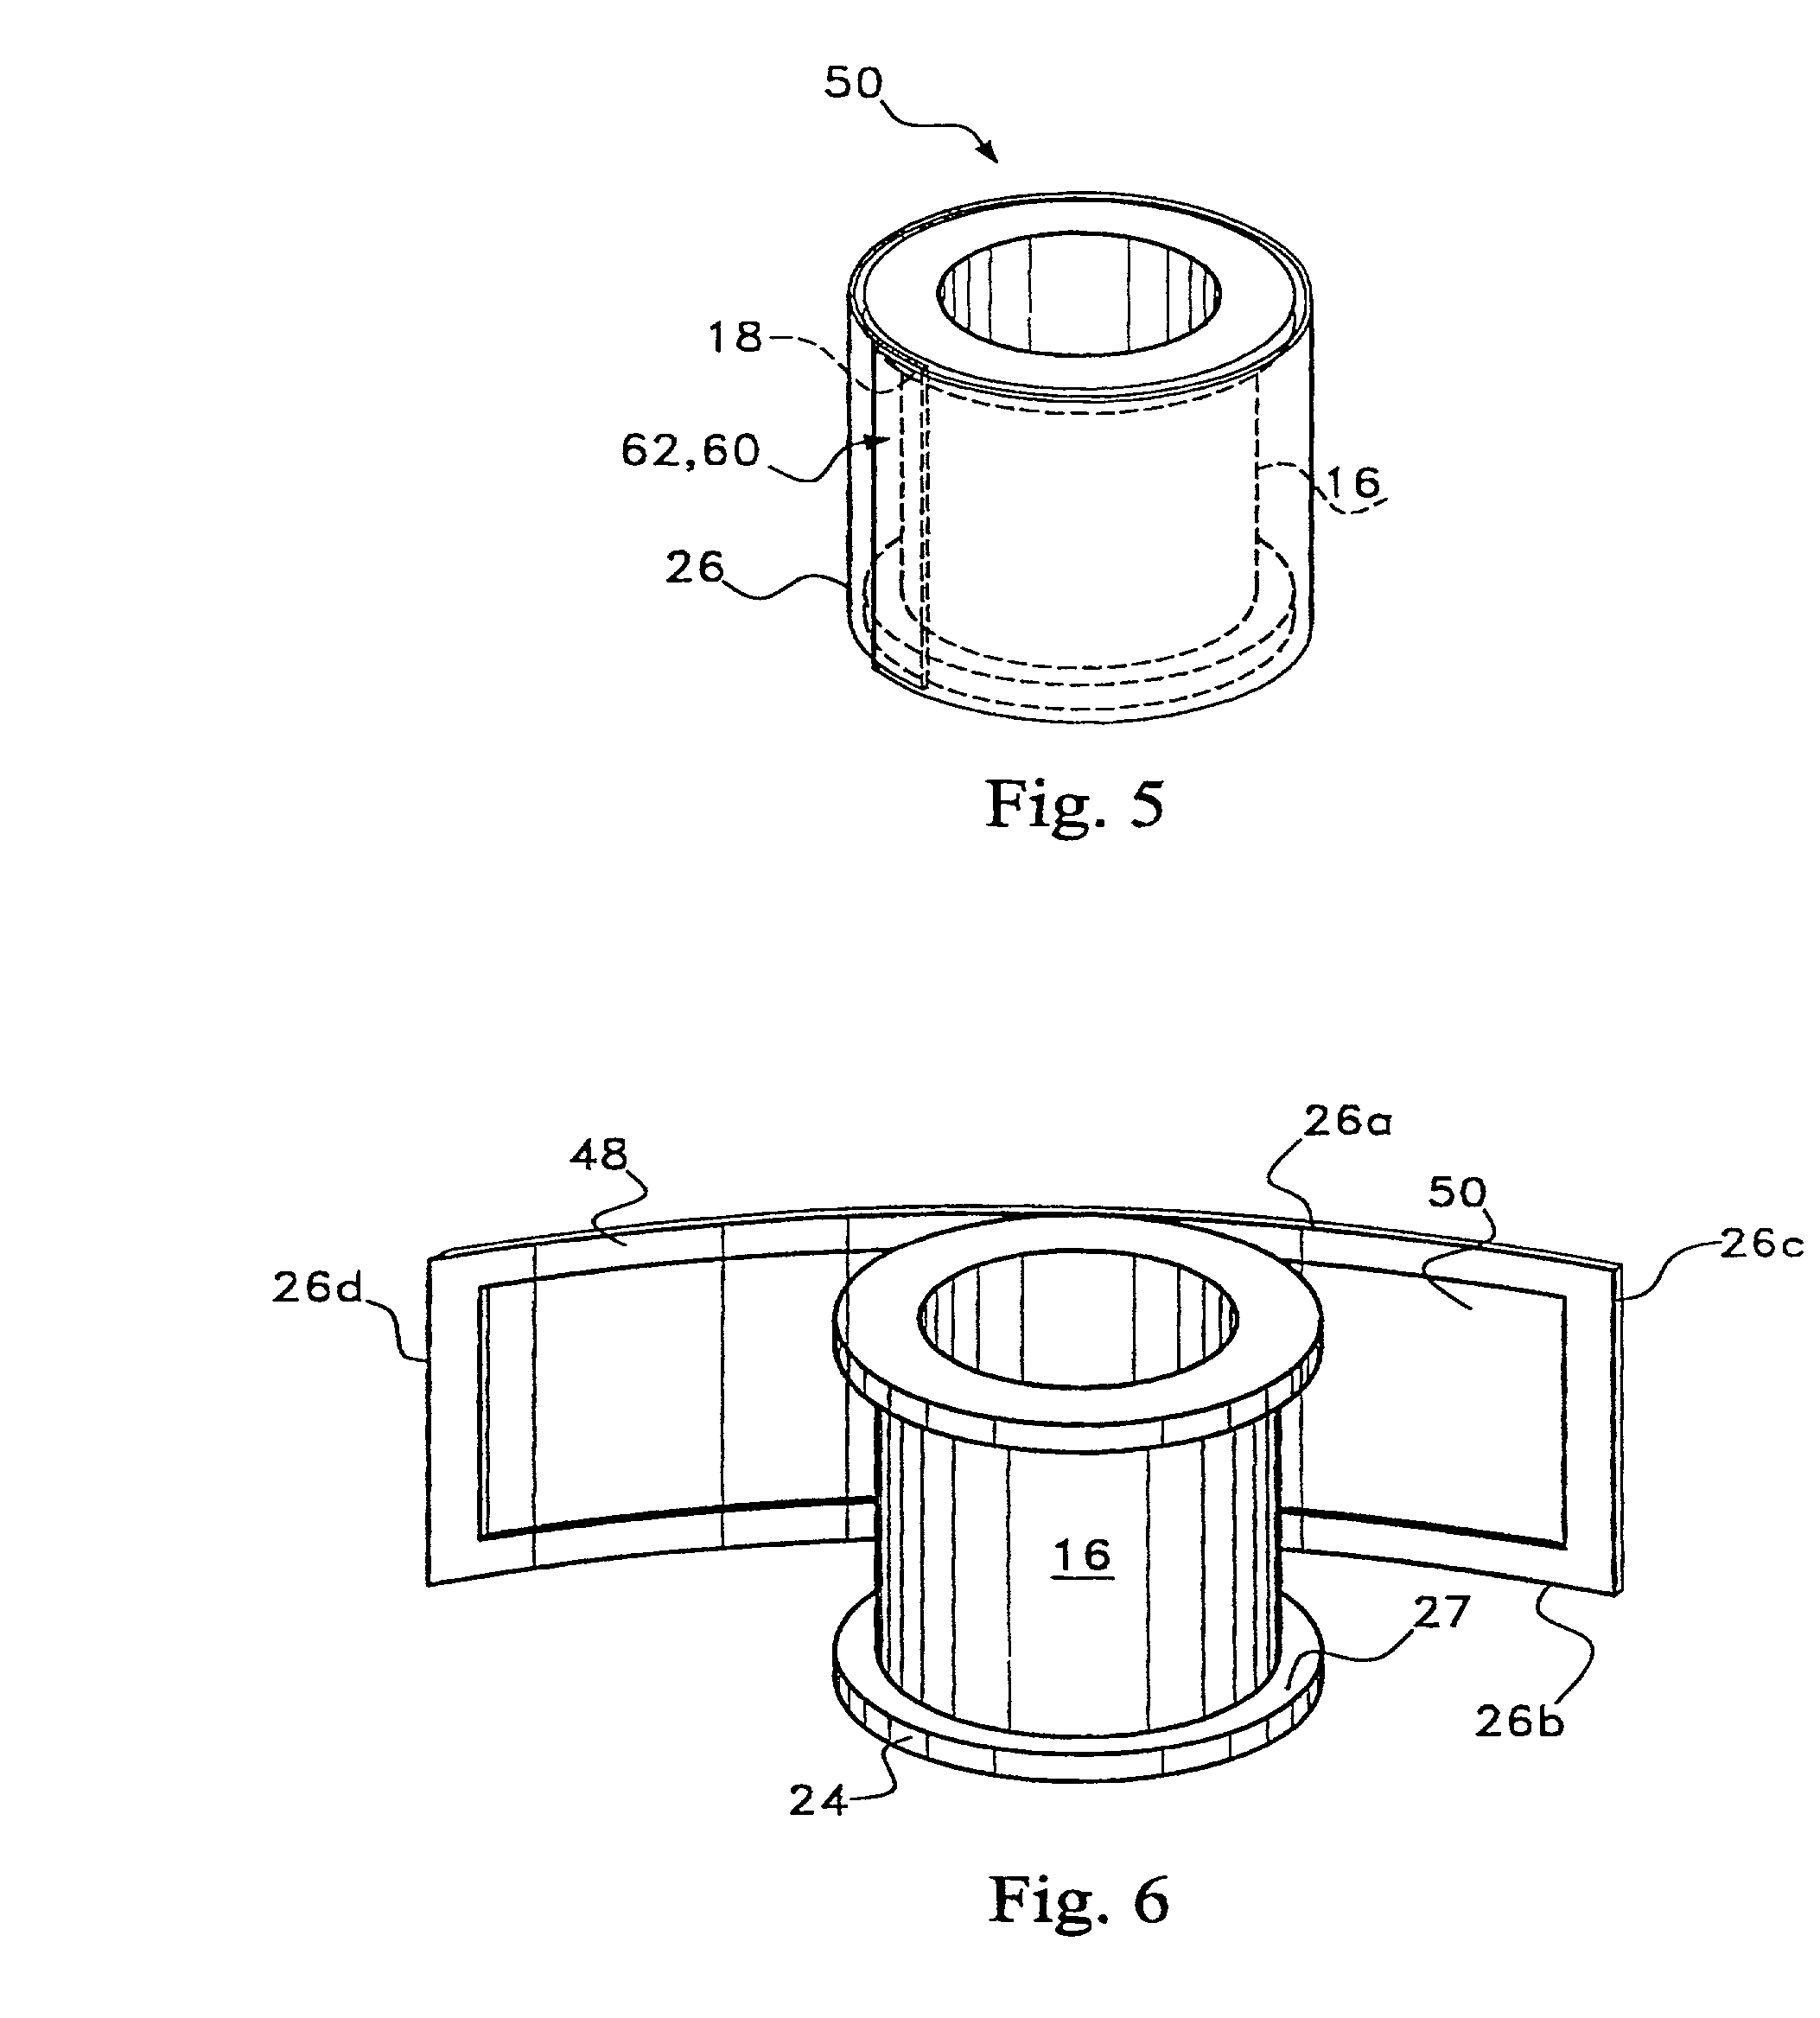 Omni-directional ultrasonic transducer apparatus and staking method